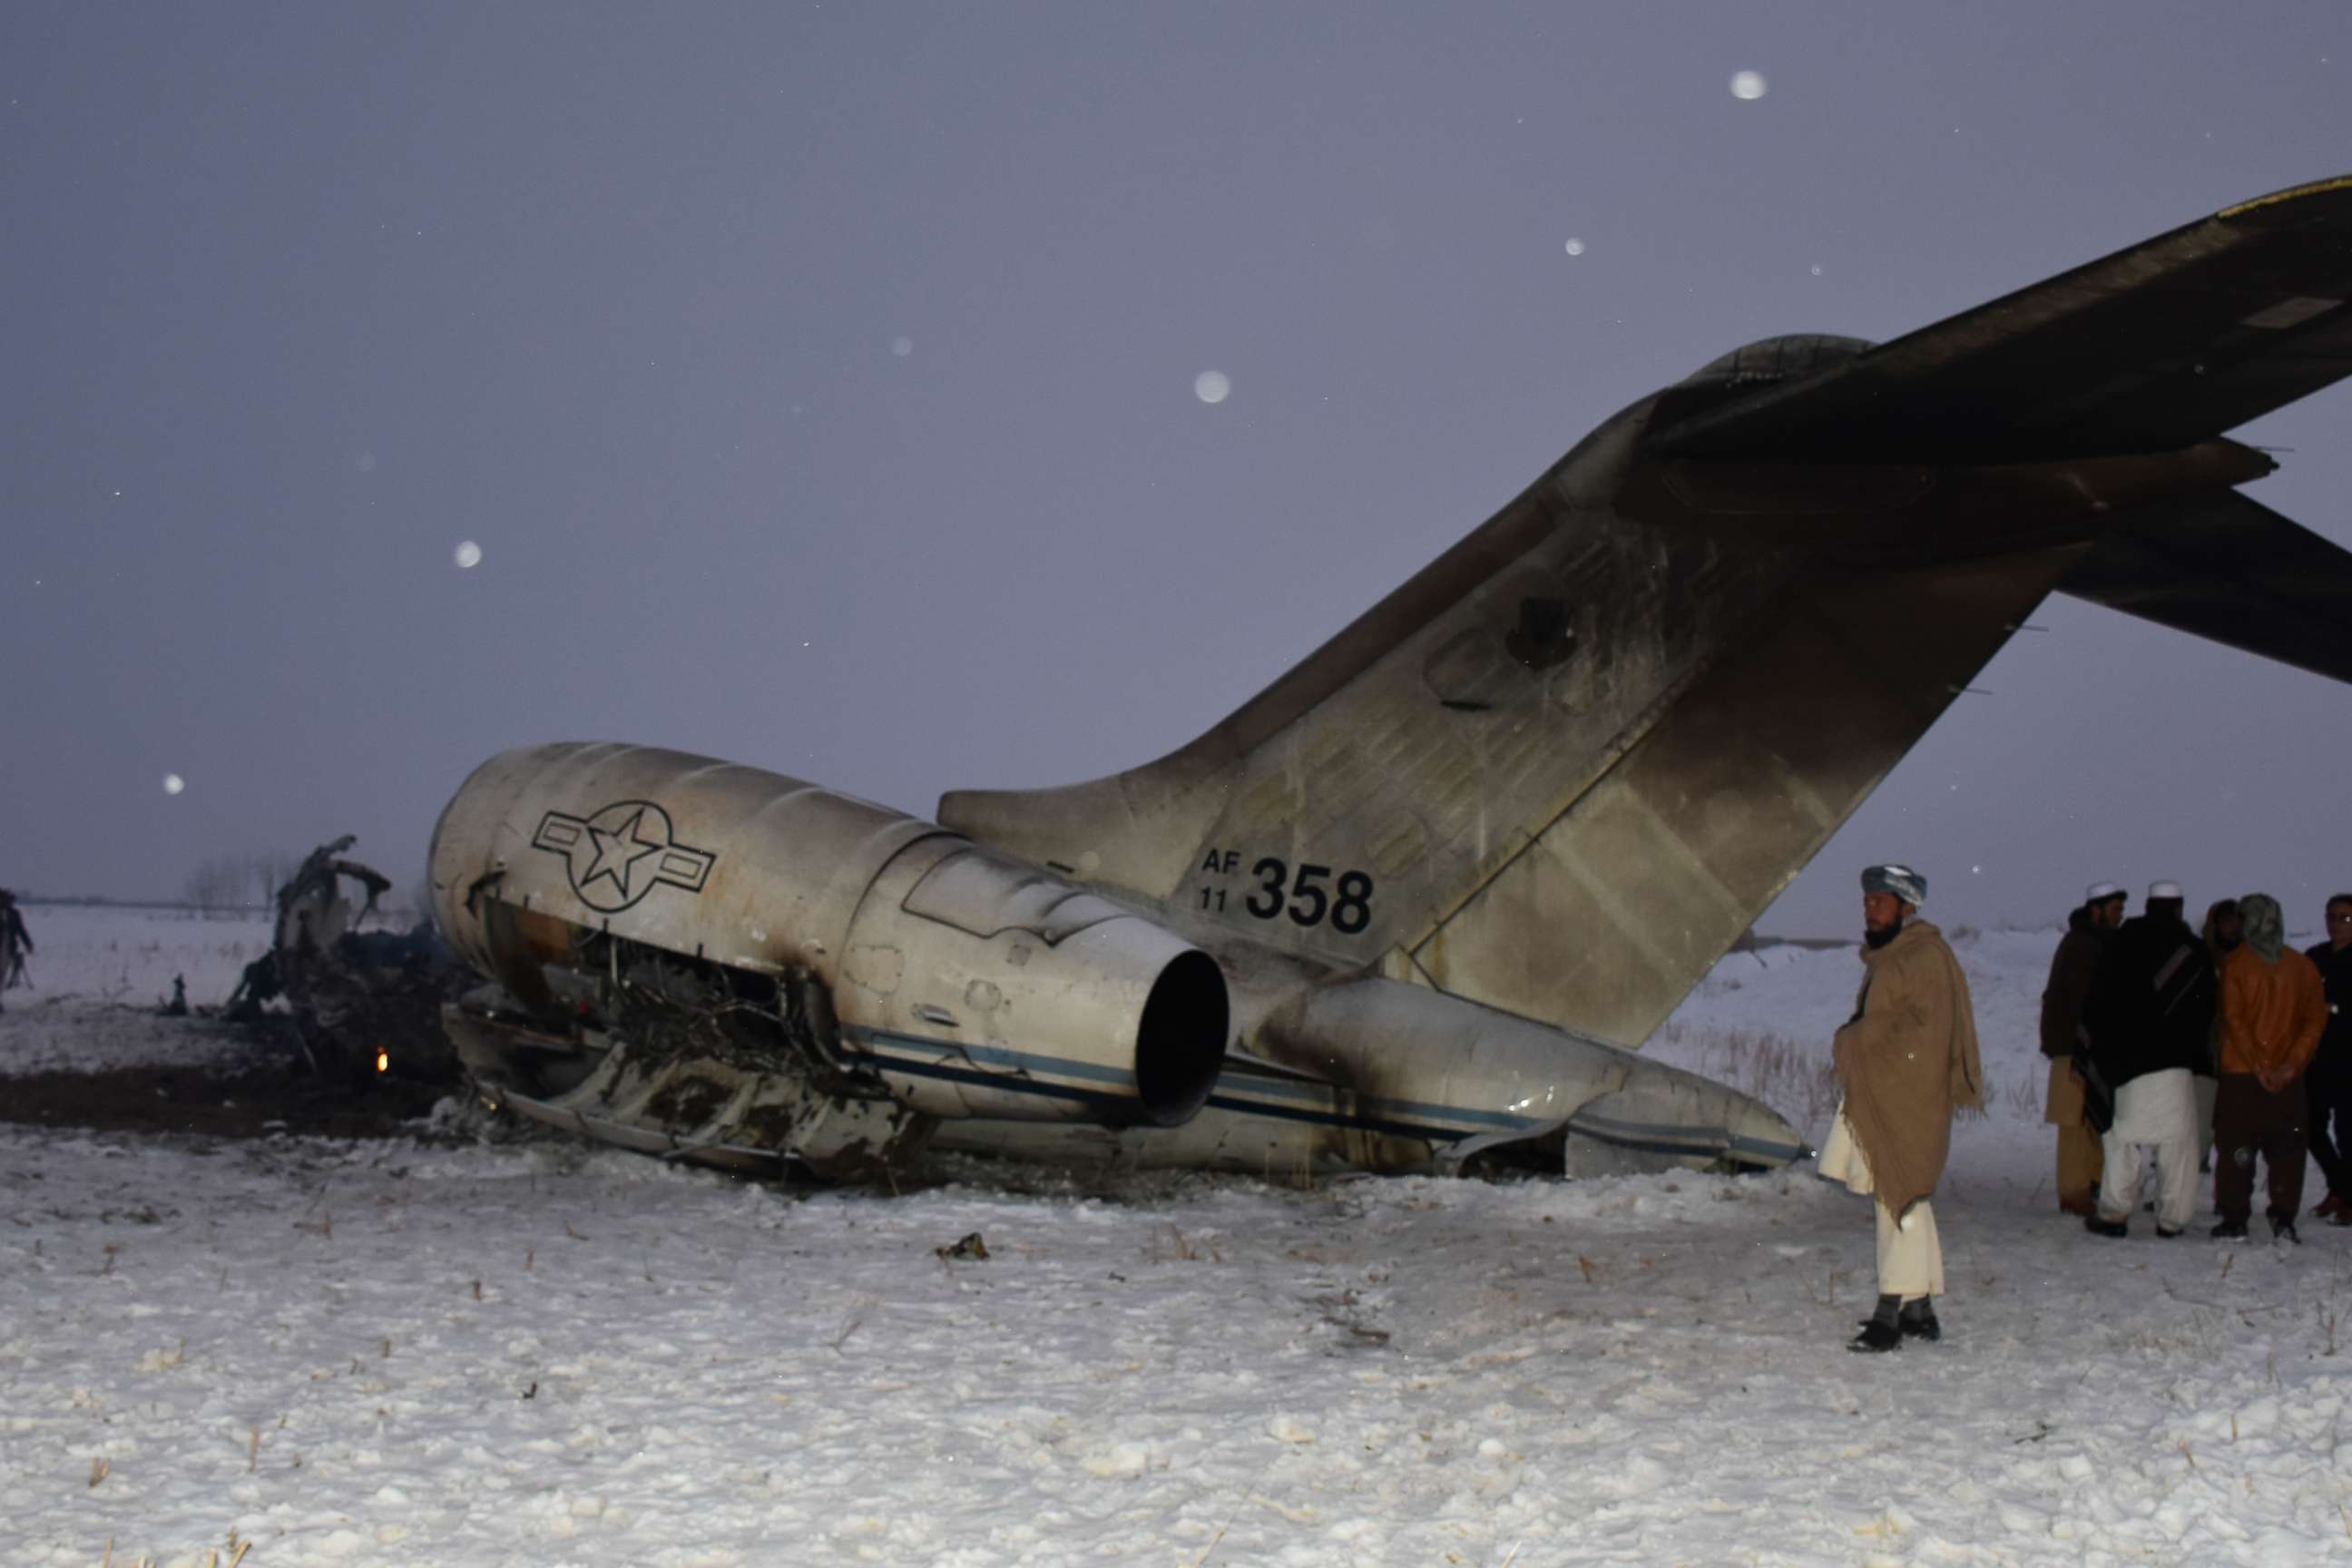 PHOTO: The wreckage of a U.S. military aircraft that crashed in Ghazni province, Afghanistan, is seen on Jan. 27, 2020.